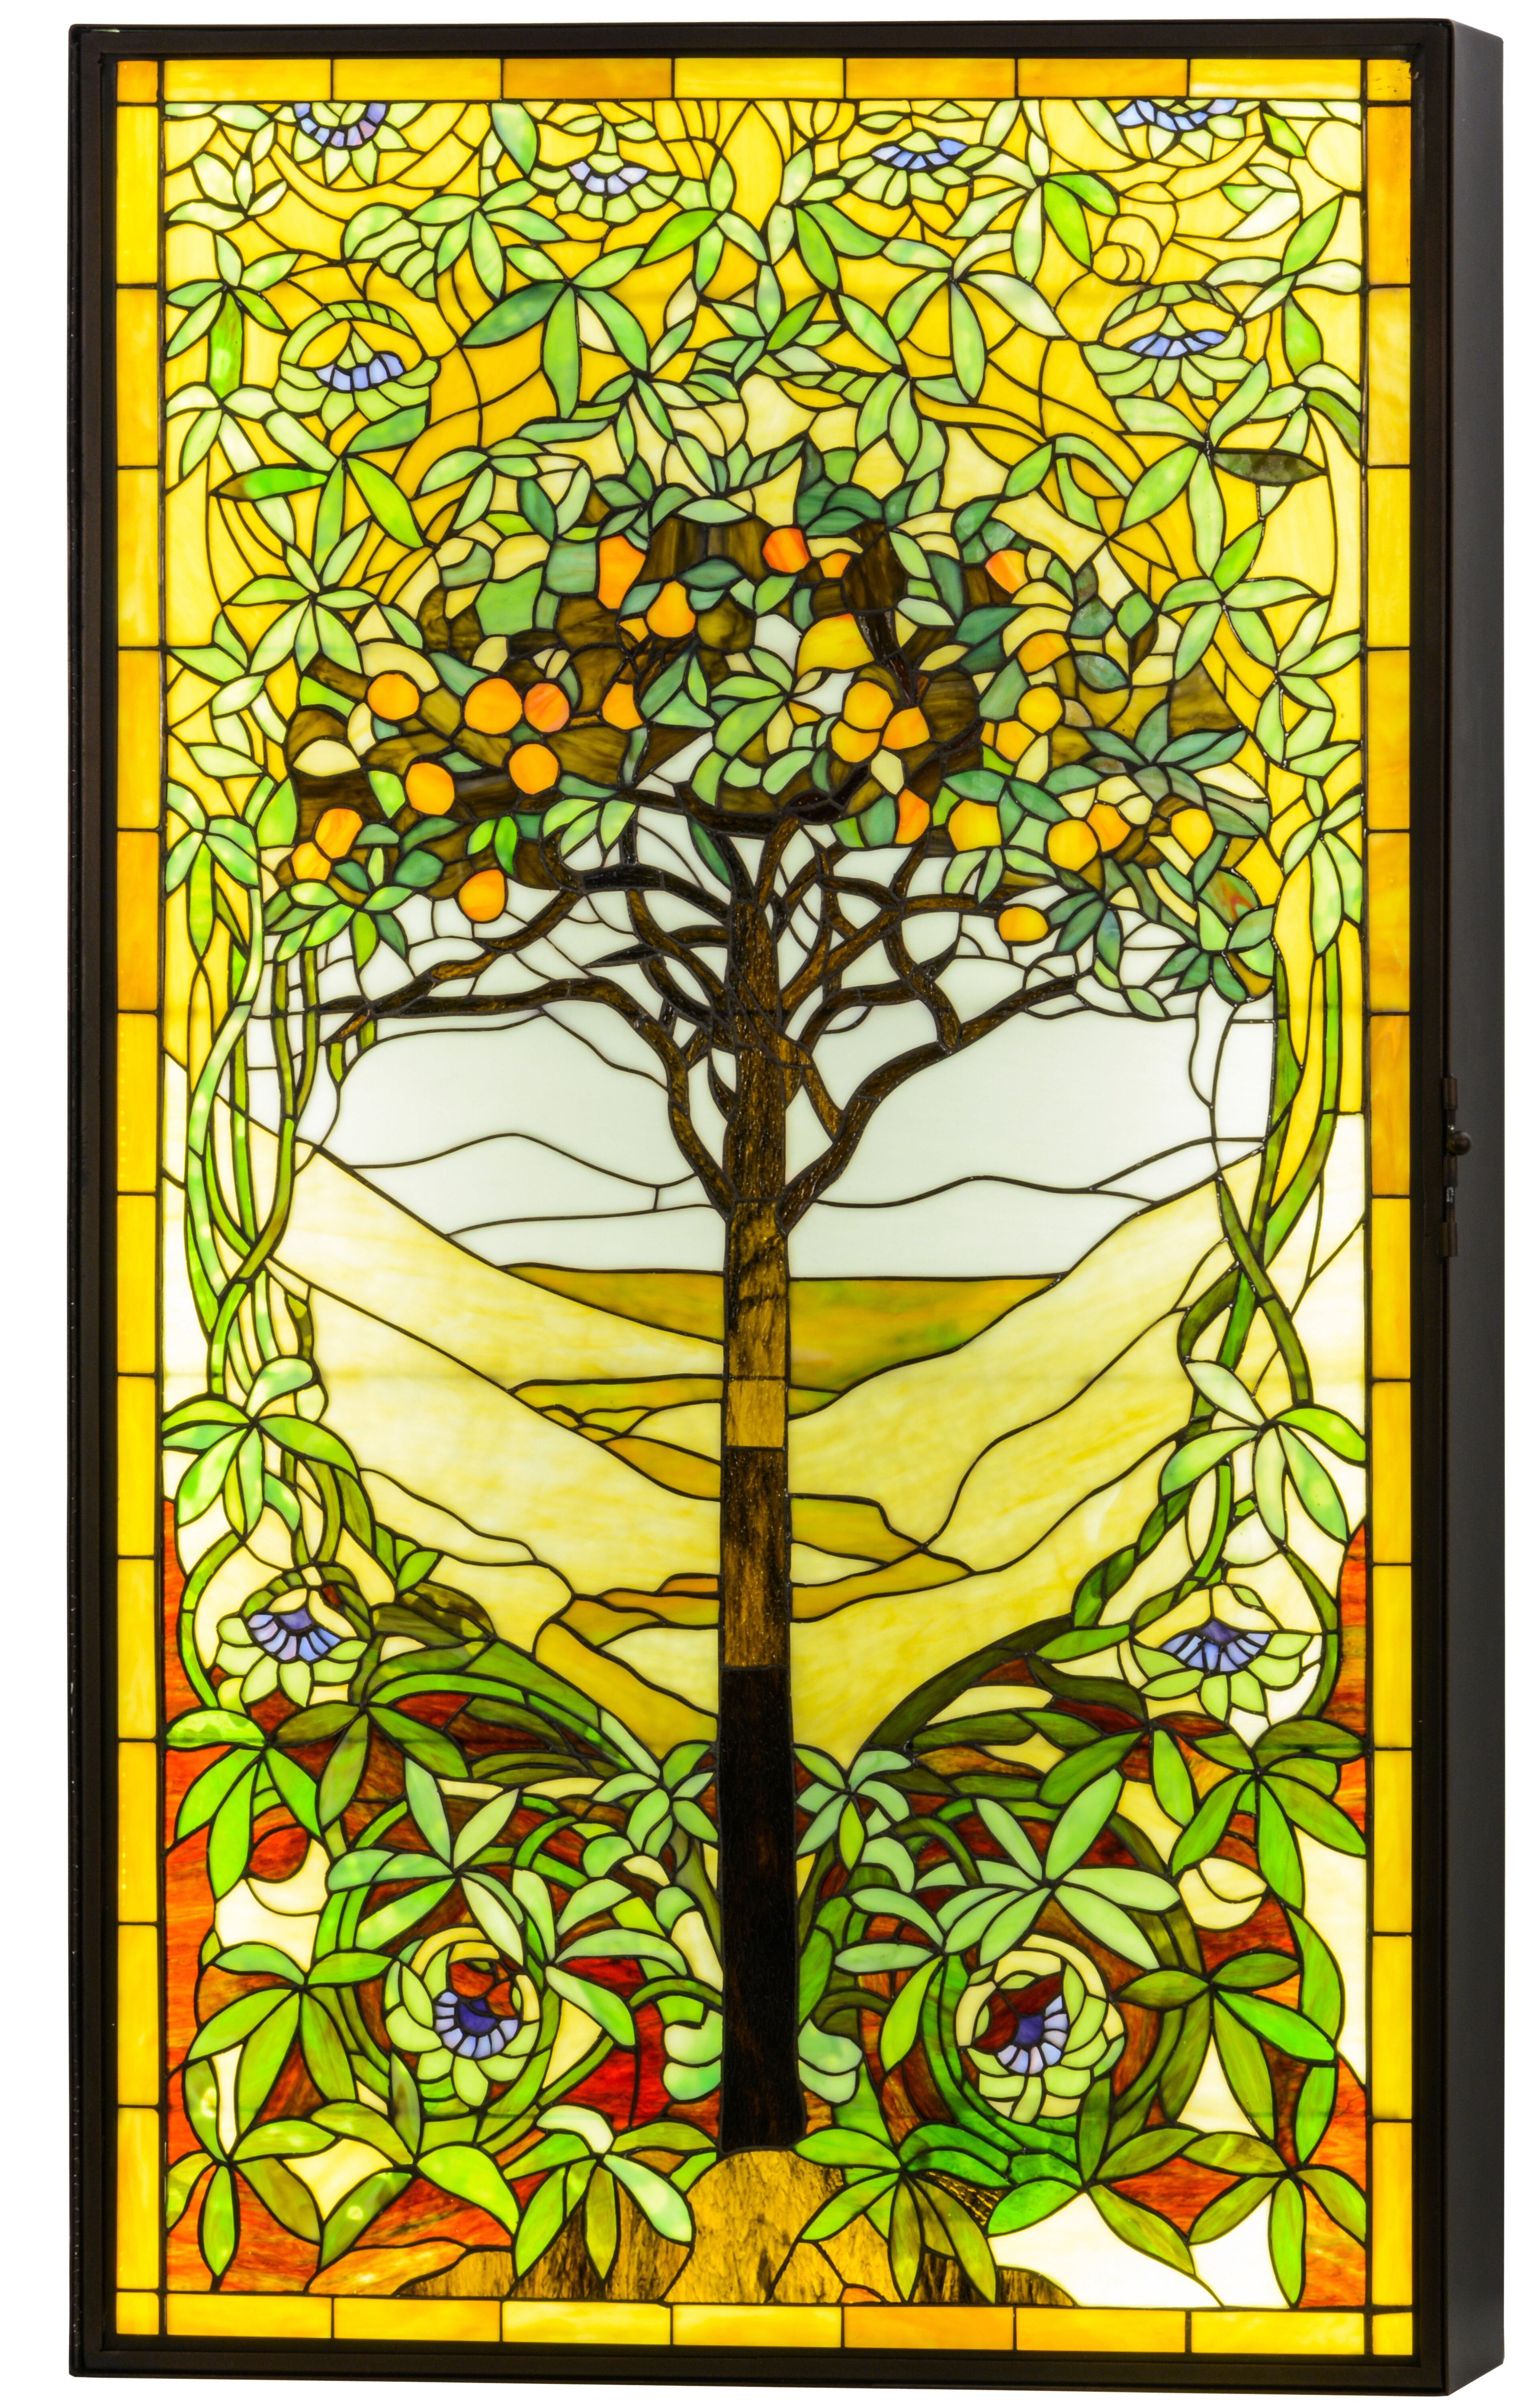 Stained Glass Tree Of Life Quilt Pattern Glass Art Art Collectibles Jan Takayama Com